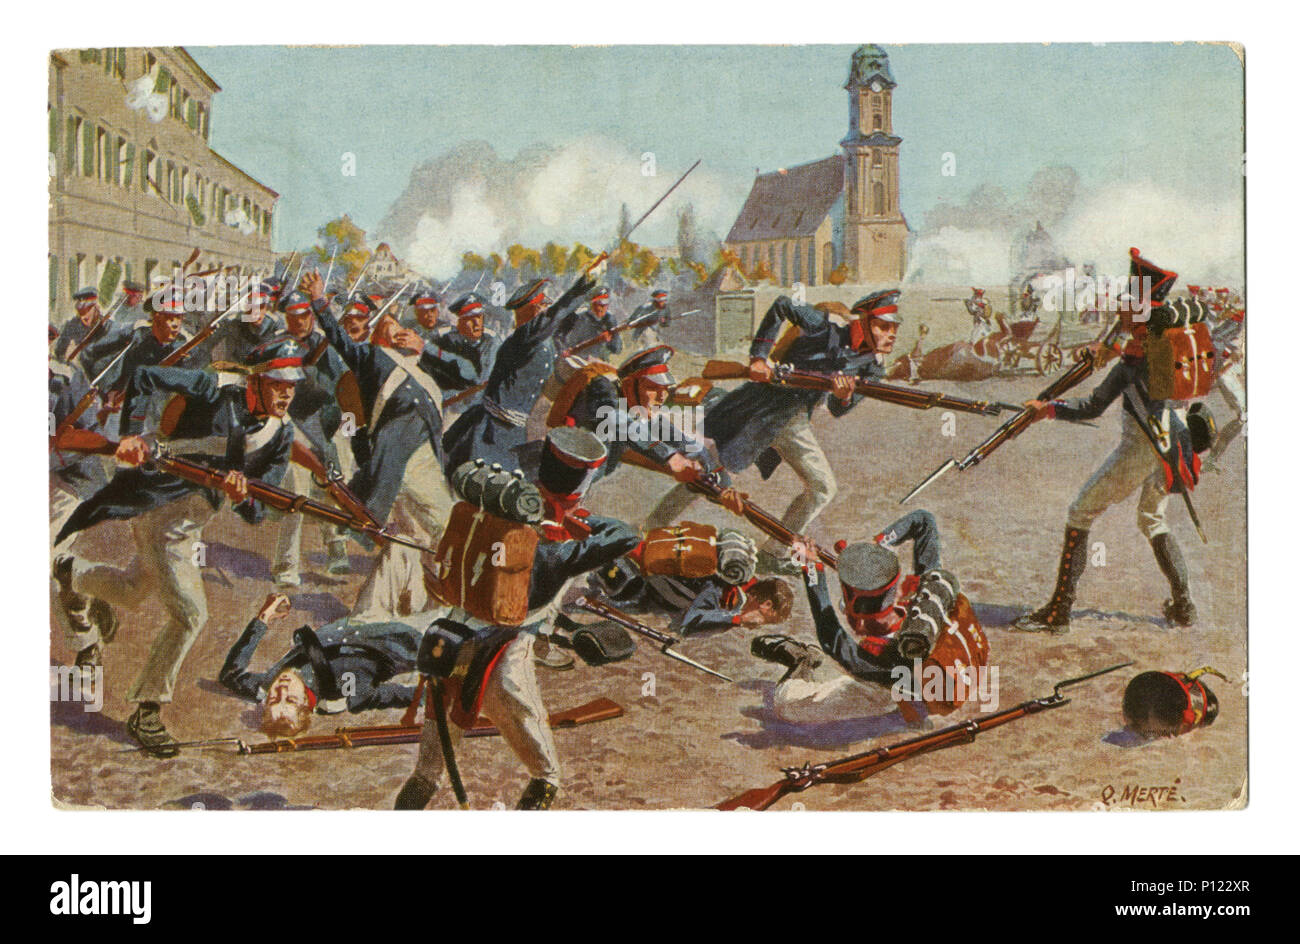 German historical postcard: Storming the Grimma gate by the East Prussian battalion of Landver under the major Friccius.  Battle of Leipzig, 1813 Stock Photo